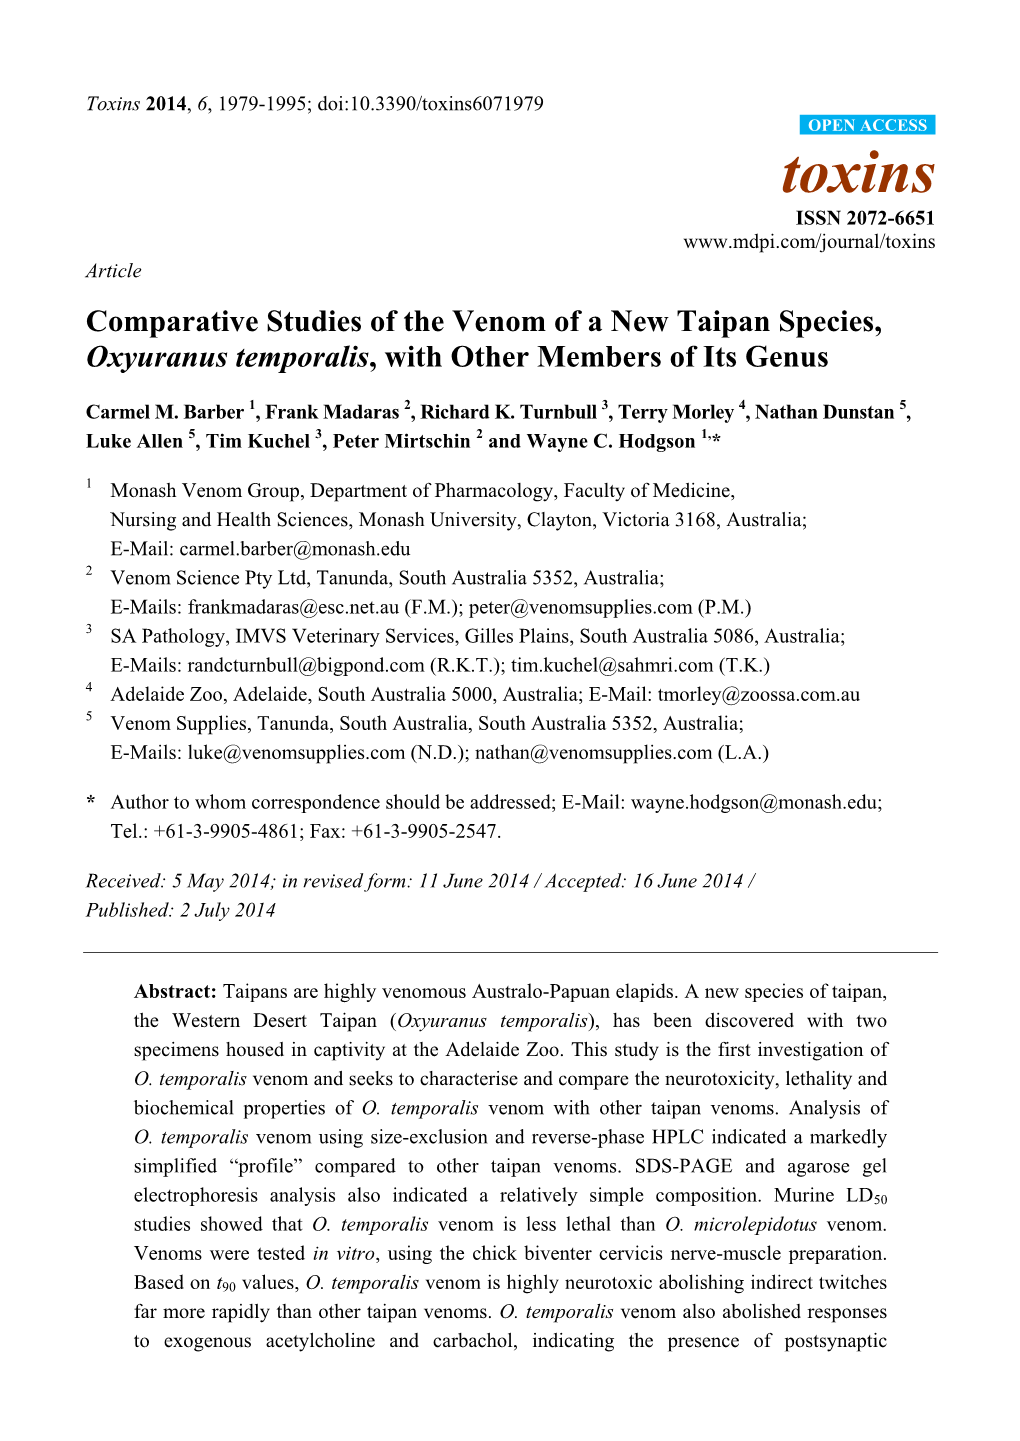 Comparative Studies of the Venom of a New Taipan Species, Oxyuranus Temporalis, with Other Members of Its Genus